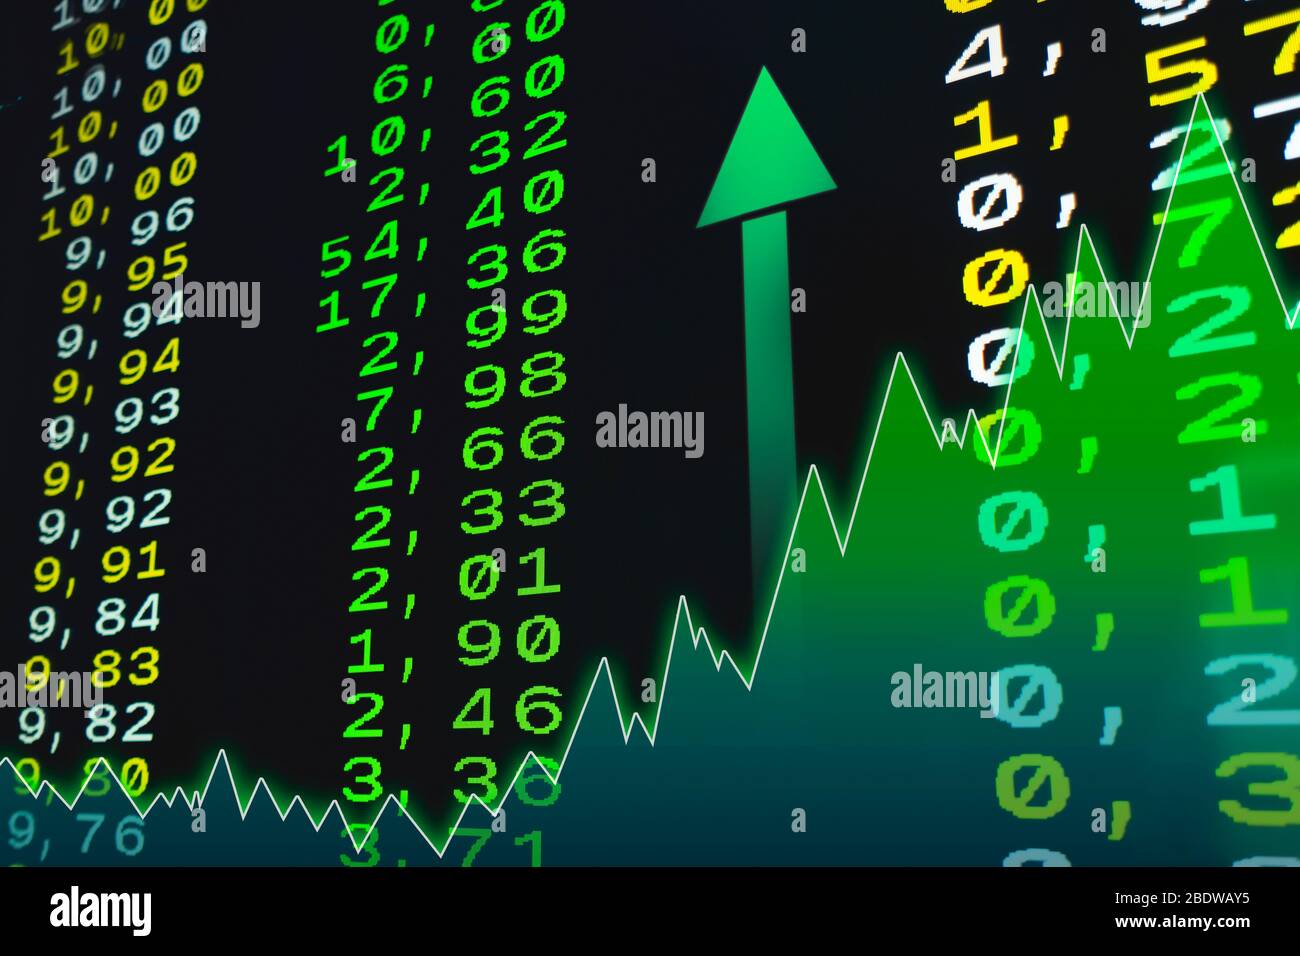 Stock Market Values in Green Numbers Showing The Increased Prices of the Share Values on Teletex Stock Photo